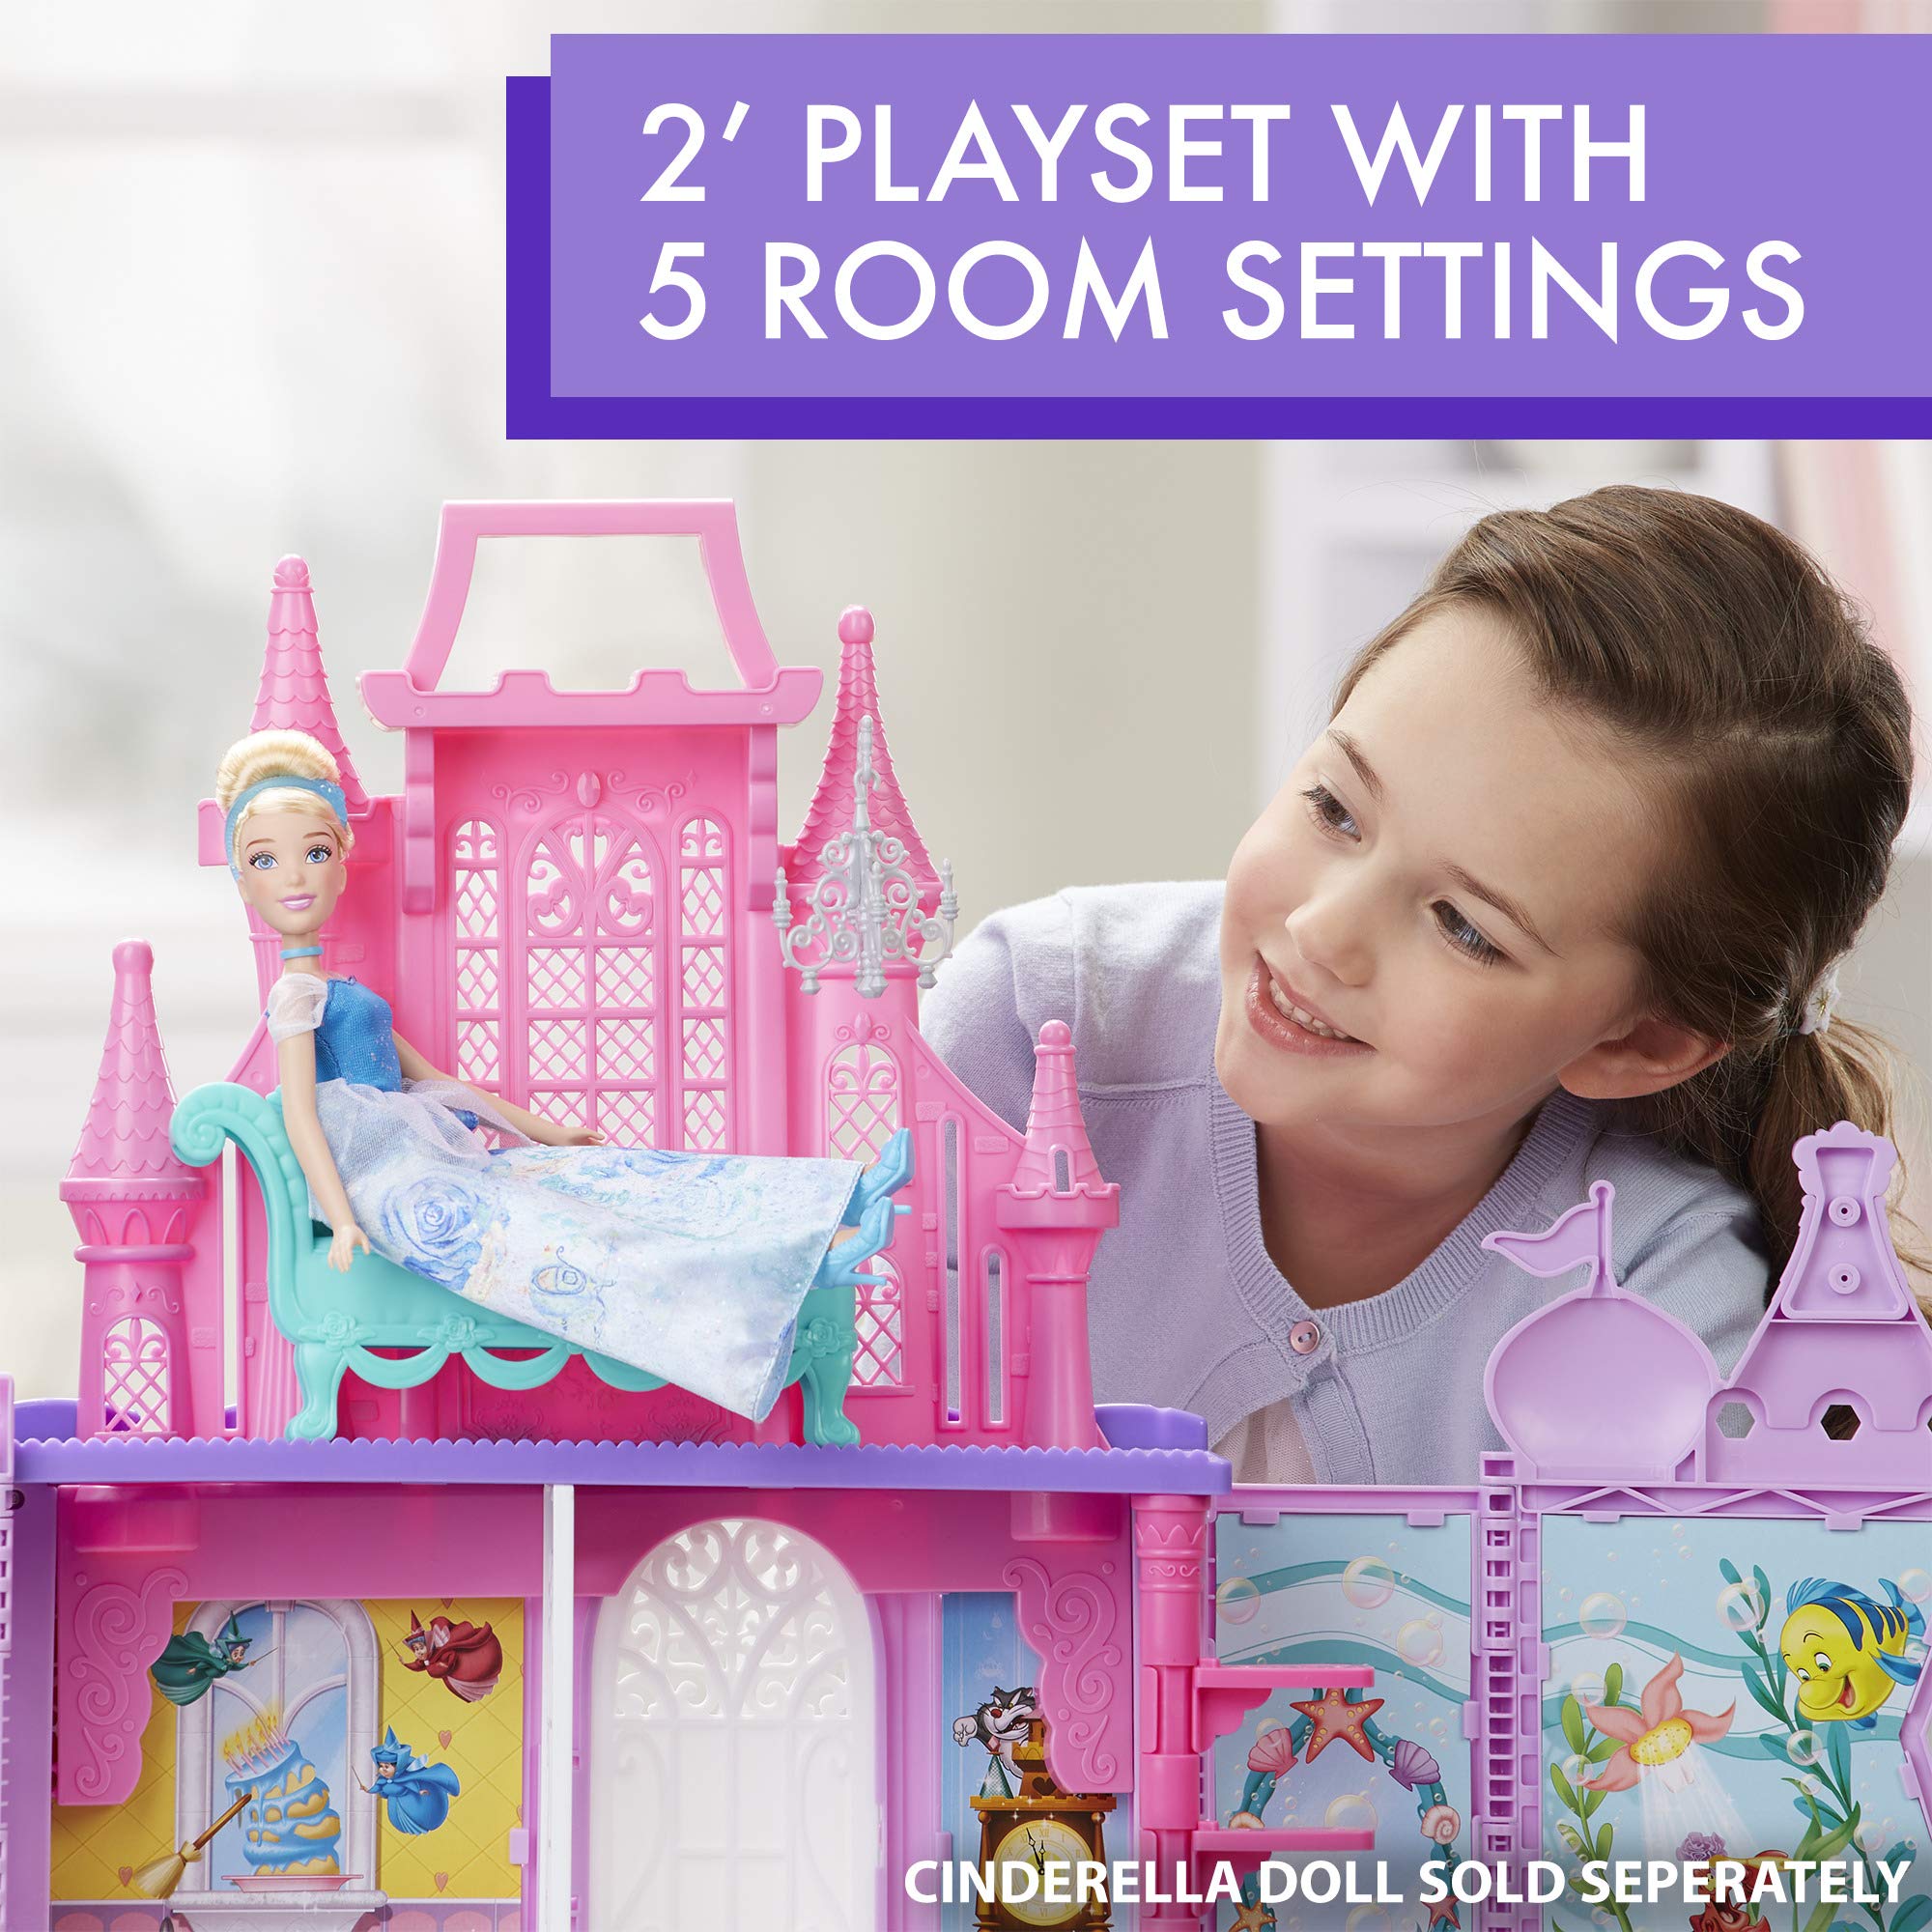 Disney Princess Pop-Up Palace, Castle Playset with Handle and 13 Accessories, 5 Rooms, 2 Feet Tall